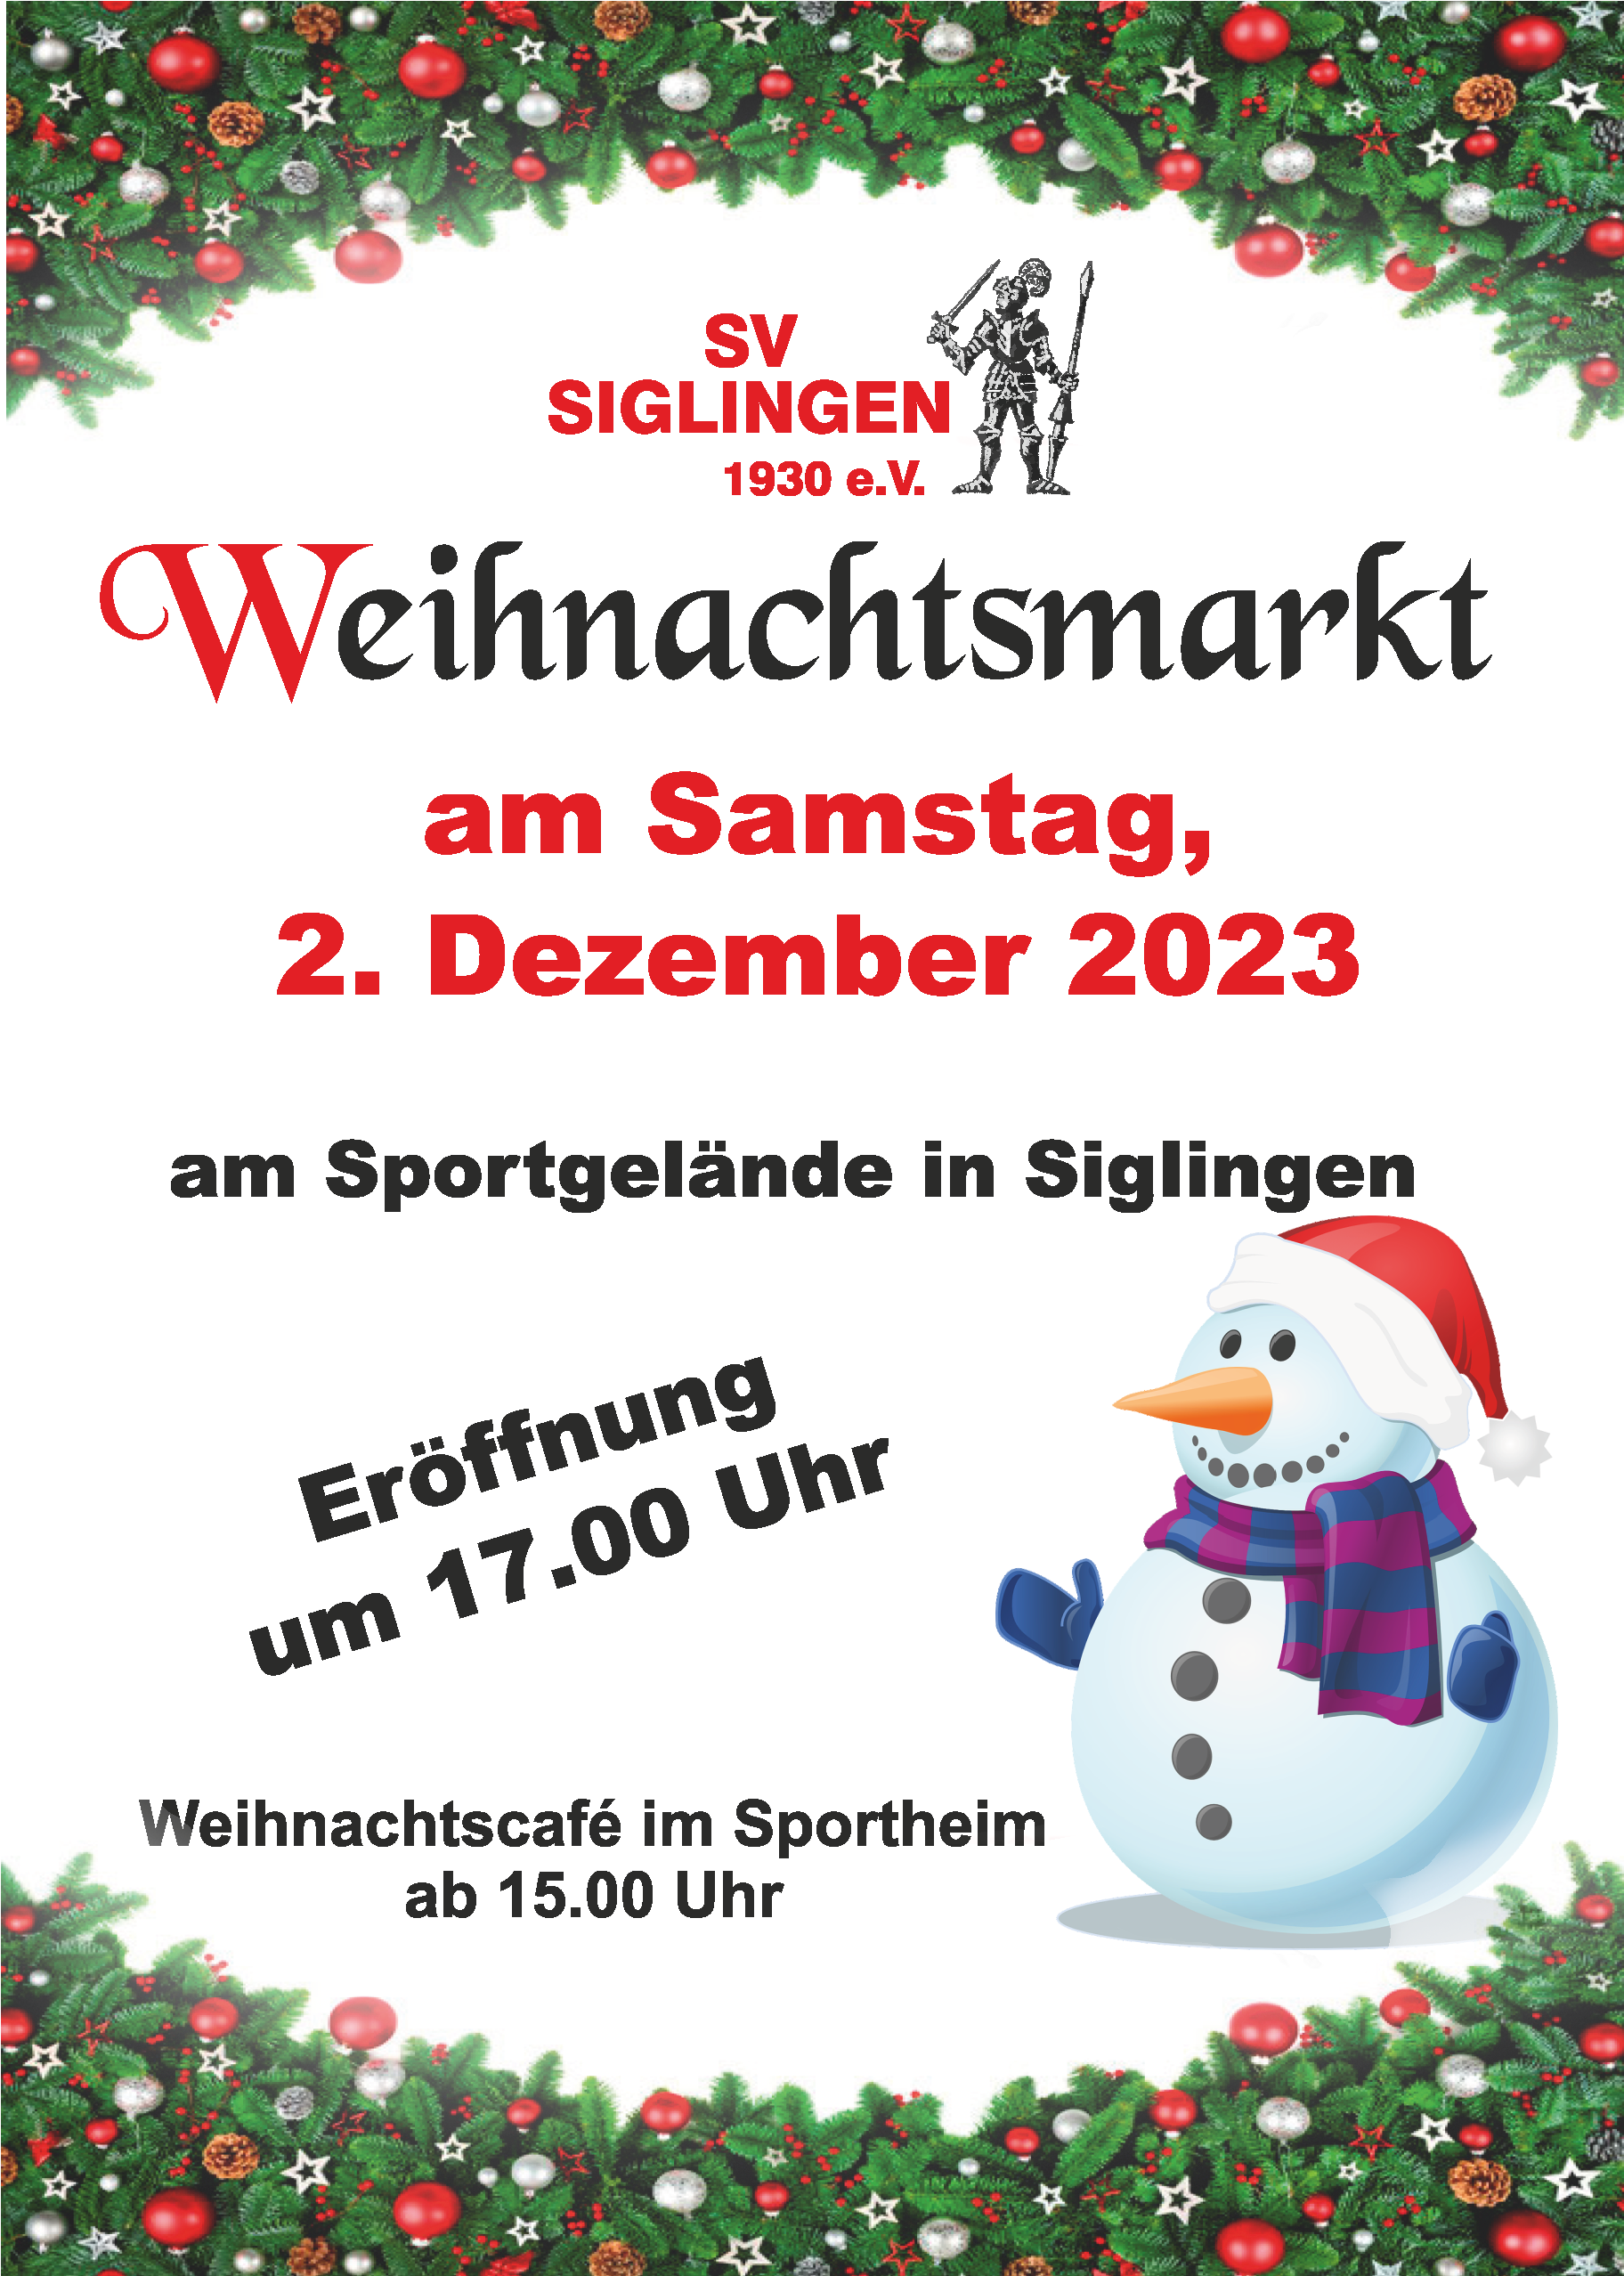 You are currently viewing Siglinger Weihnachtsmarkt 2023 02.12.2023 ab 17.00 Uhr